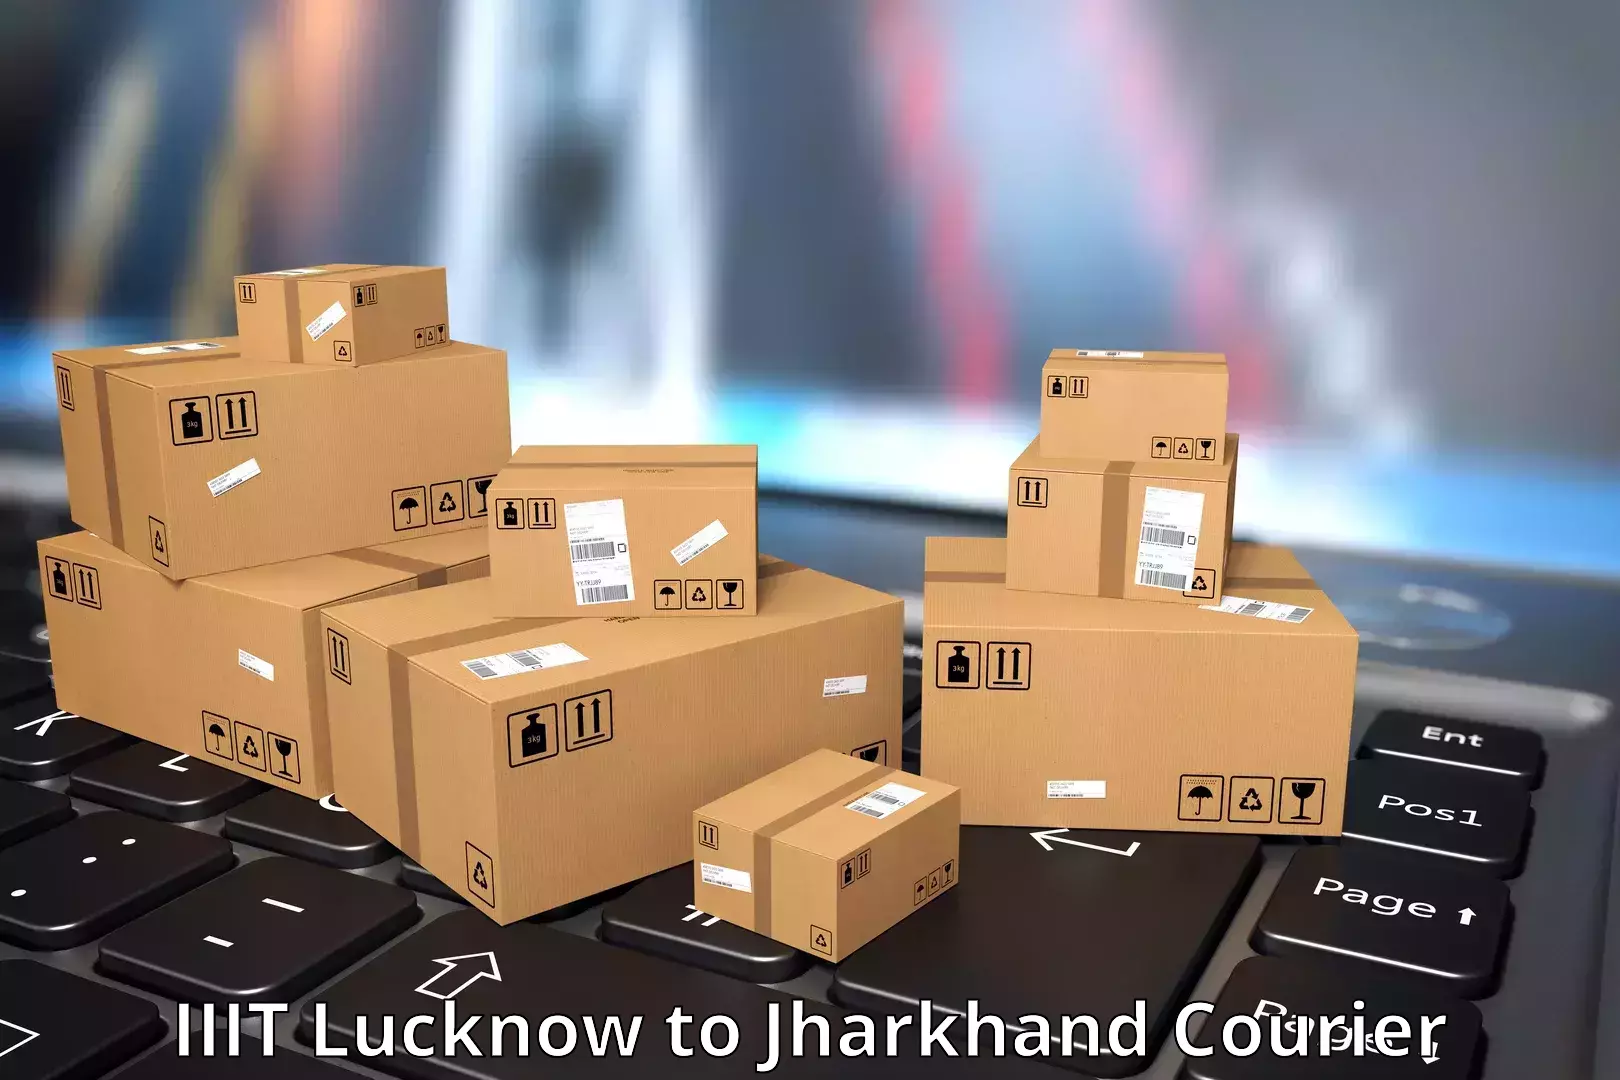 Same-day delivery options IIIT Lucknow to IIT Dhanbad